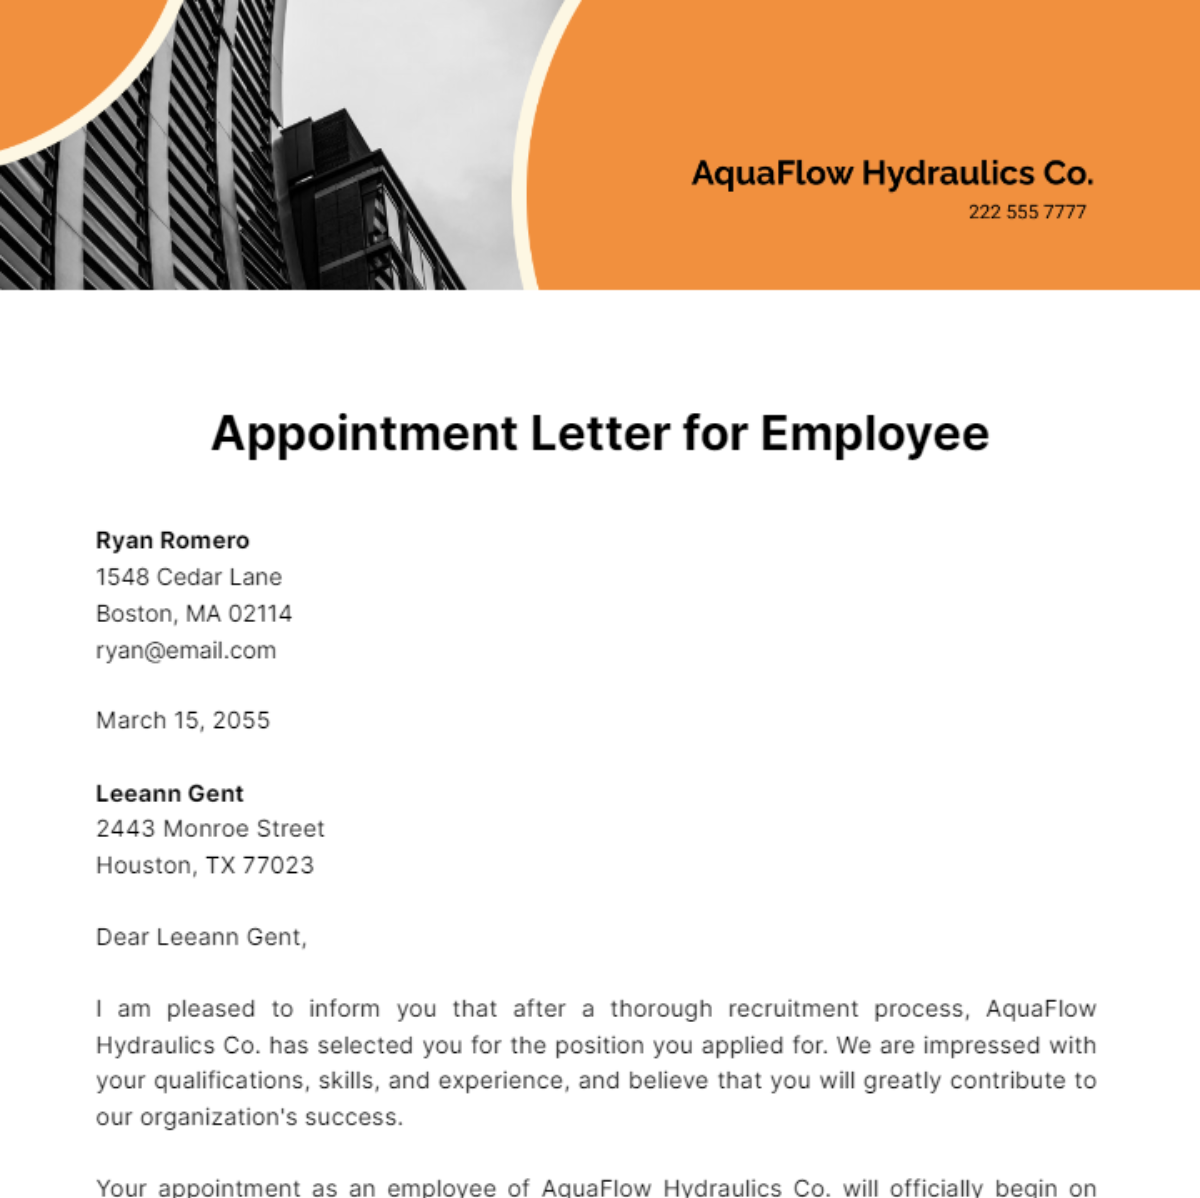 Appointment Letter for Employee Template